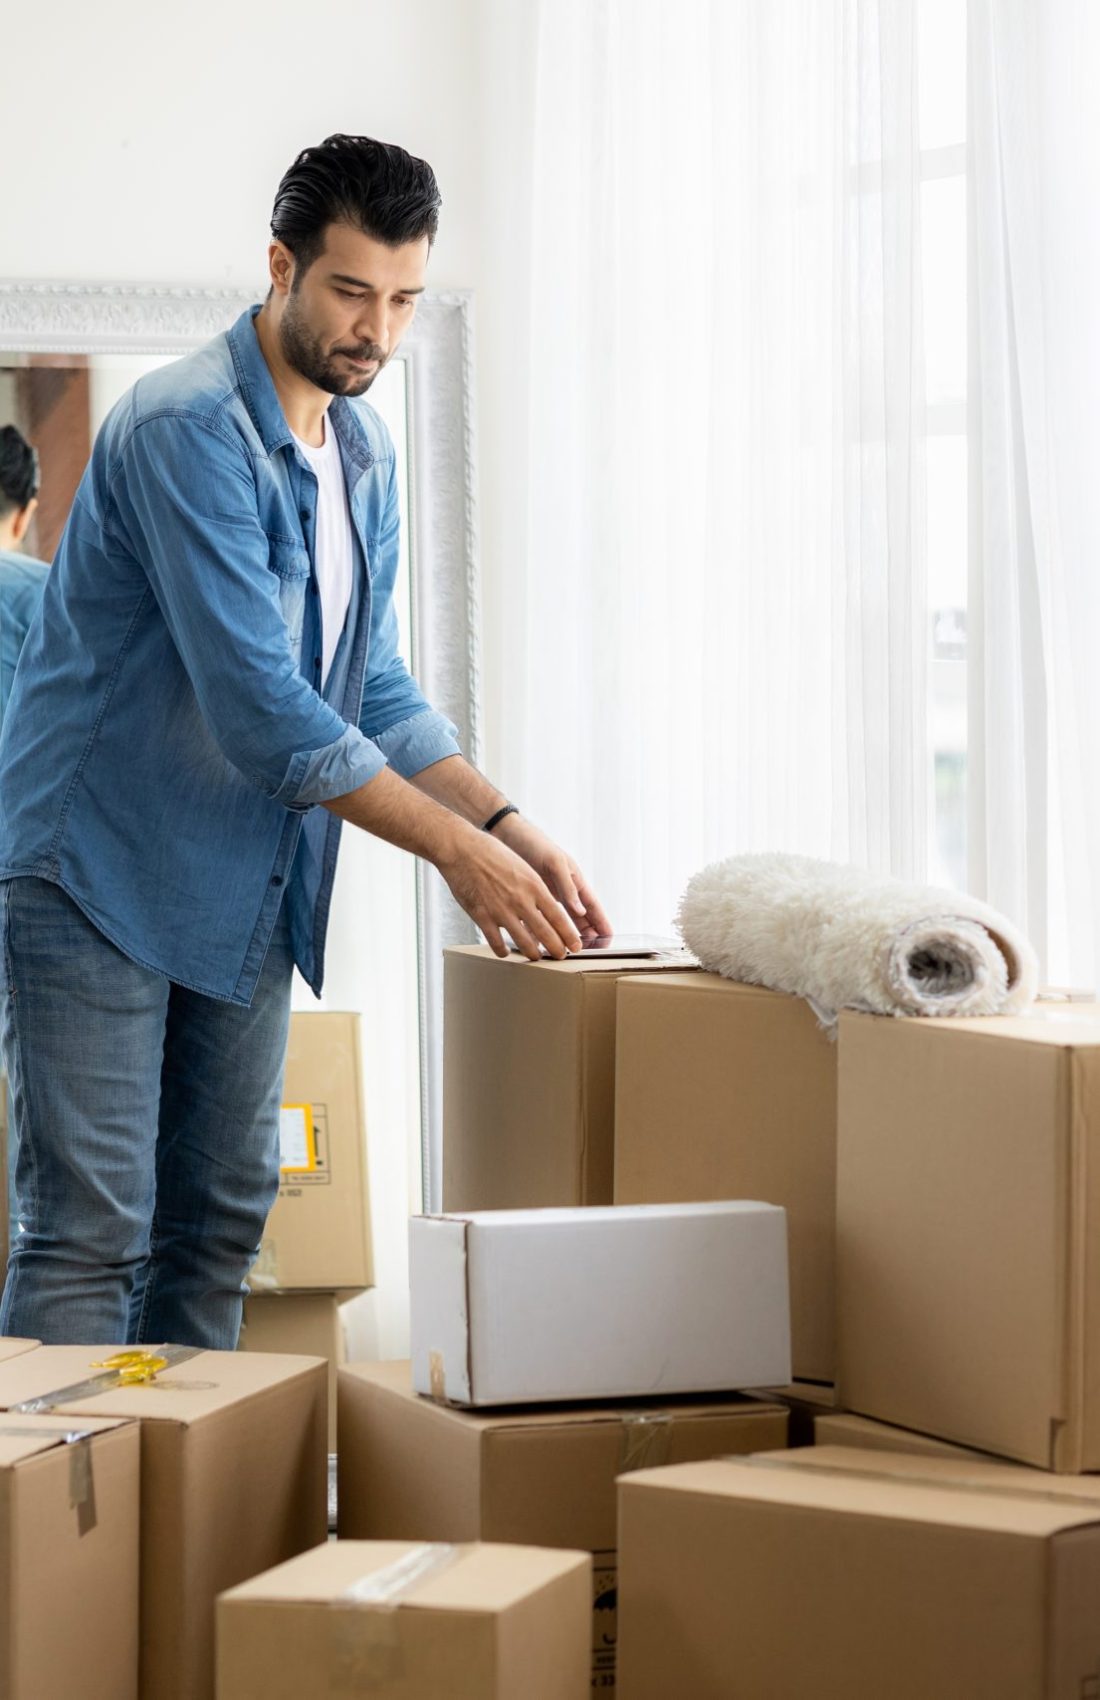 Young,Man,Just,Moving,New,House.,He,Unpacking,Parcel,Box